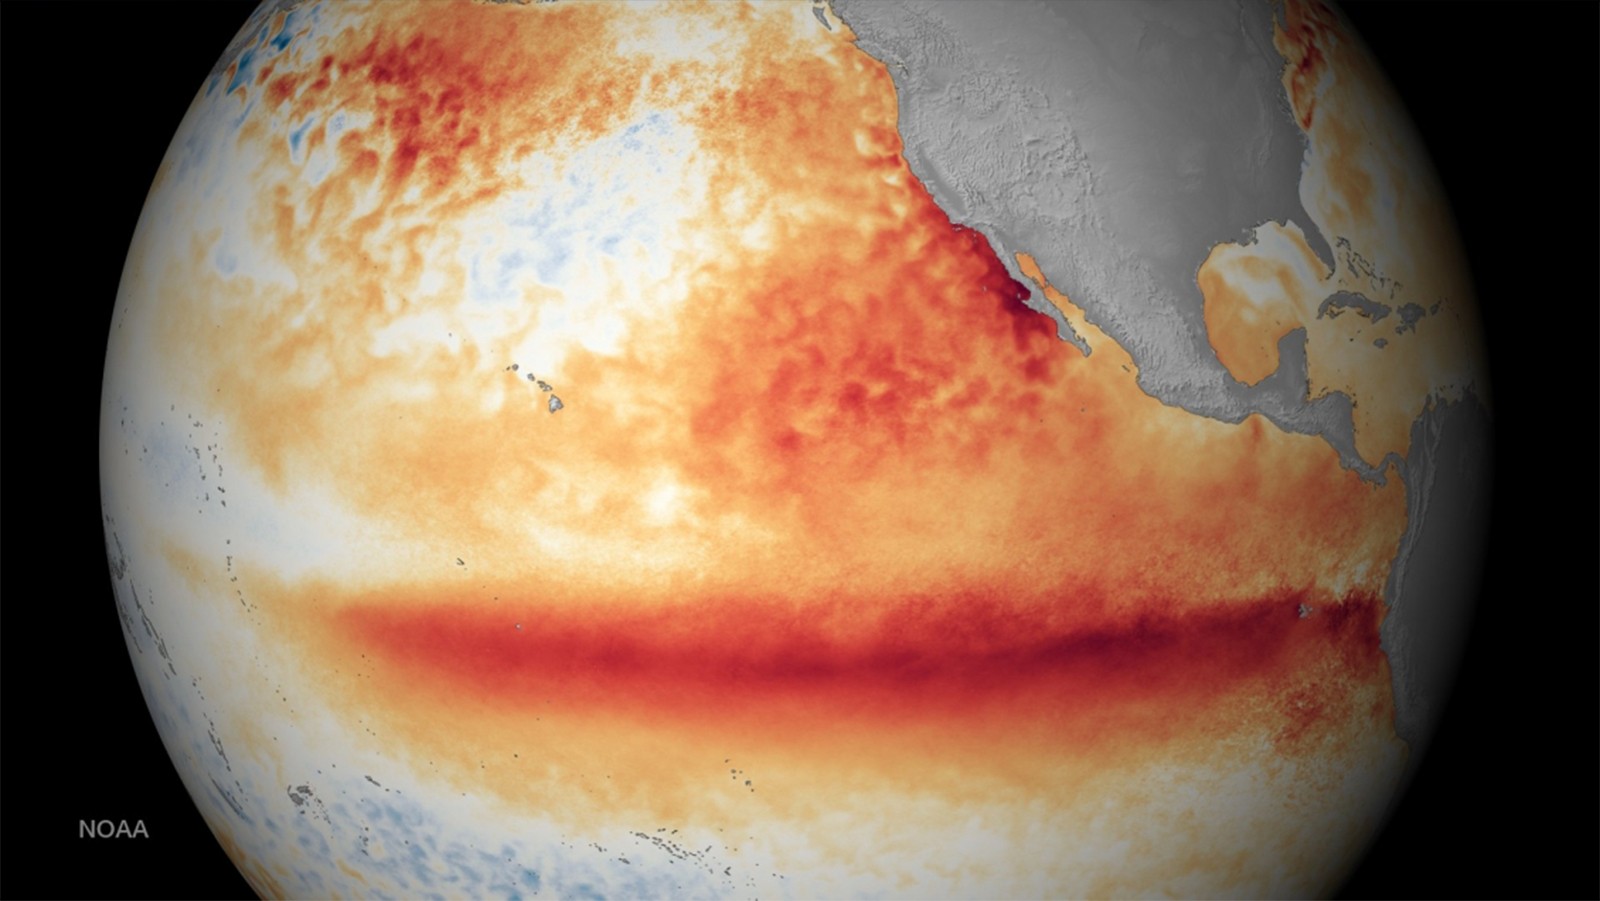 Satellite image of the surface temperature of the Earth shows a dark red patch in the Pacific indicating an El Nino event.